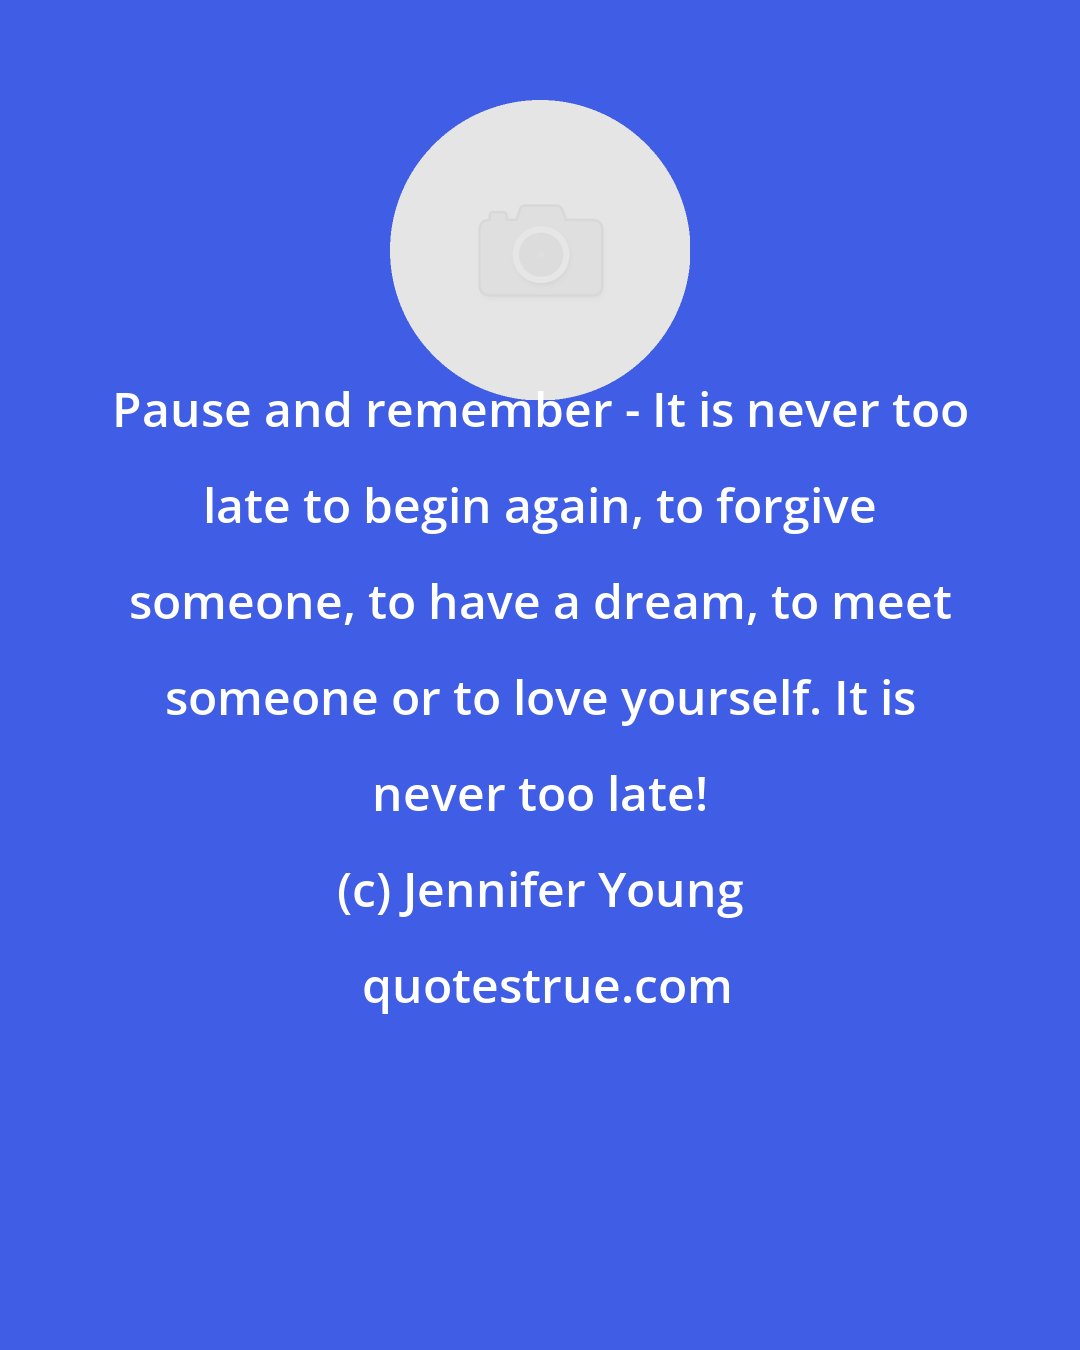 Jennifer Young: Pause and remember - It is never too late to begin again, to forgive someone, to have a dream, to meet someone or to love yourself. It is never too late!